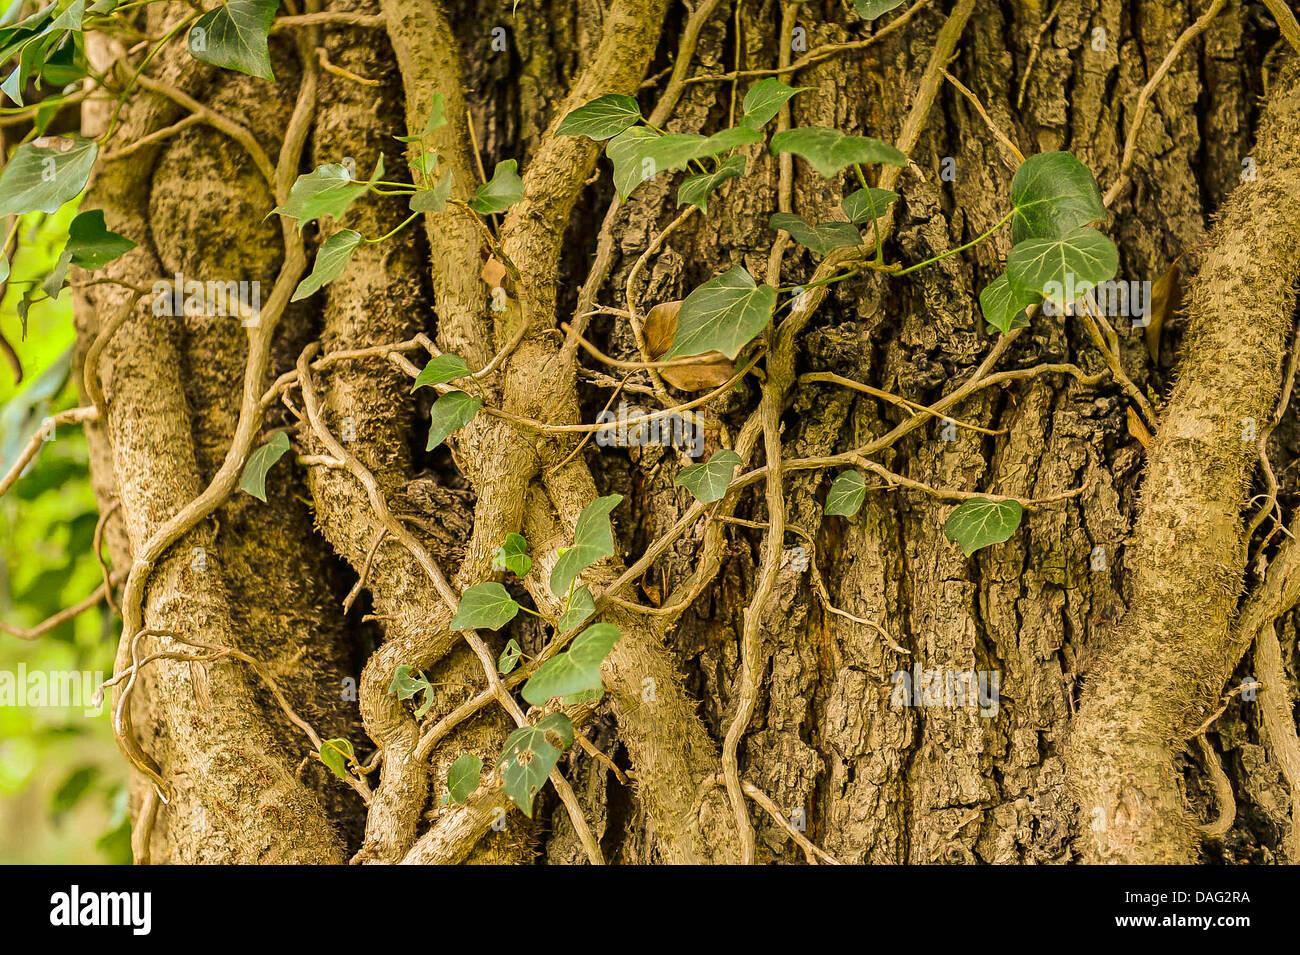 English ivy, common ivy (Hedera helix), thick stems at an oak trunk, Germany, North Rhine-Westphalia Stock Photo